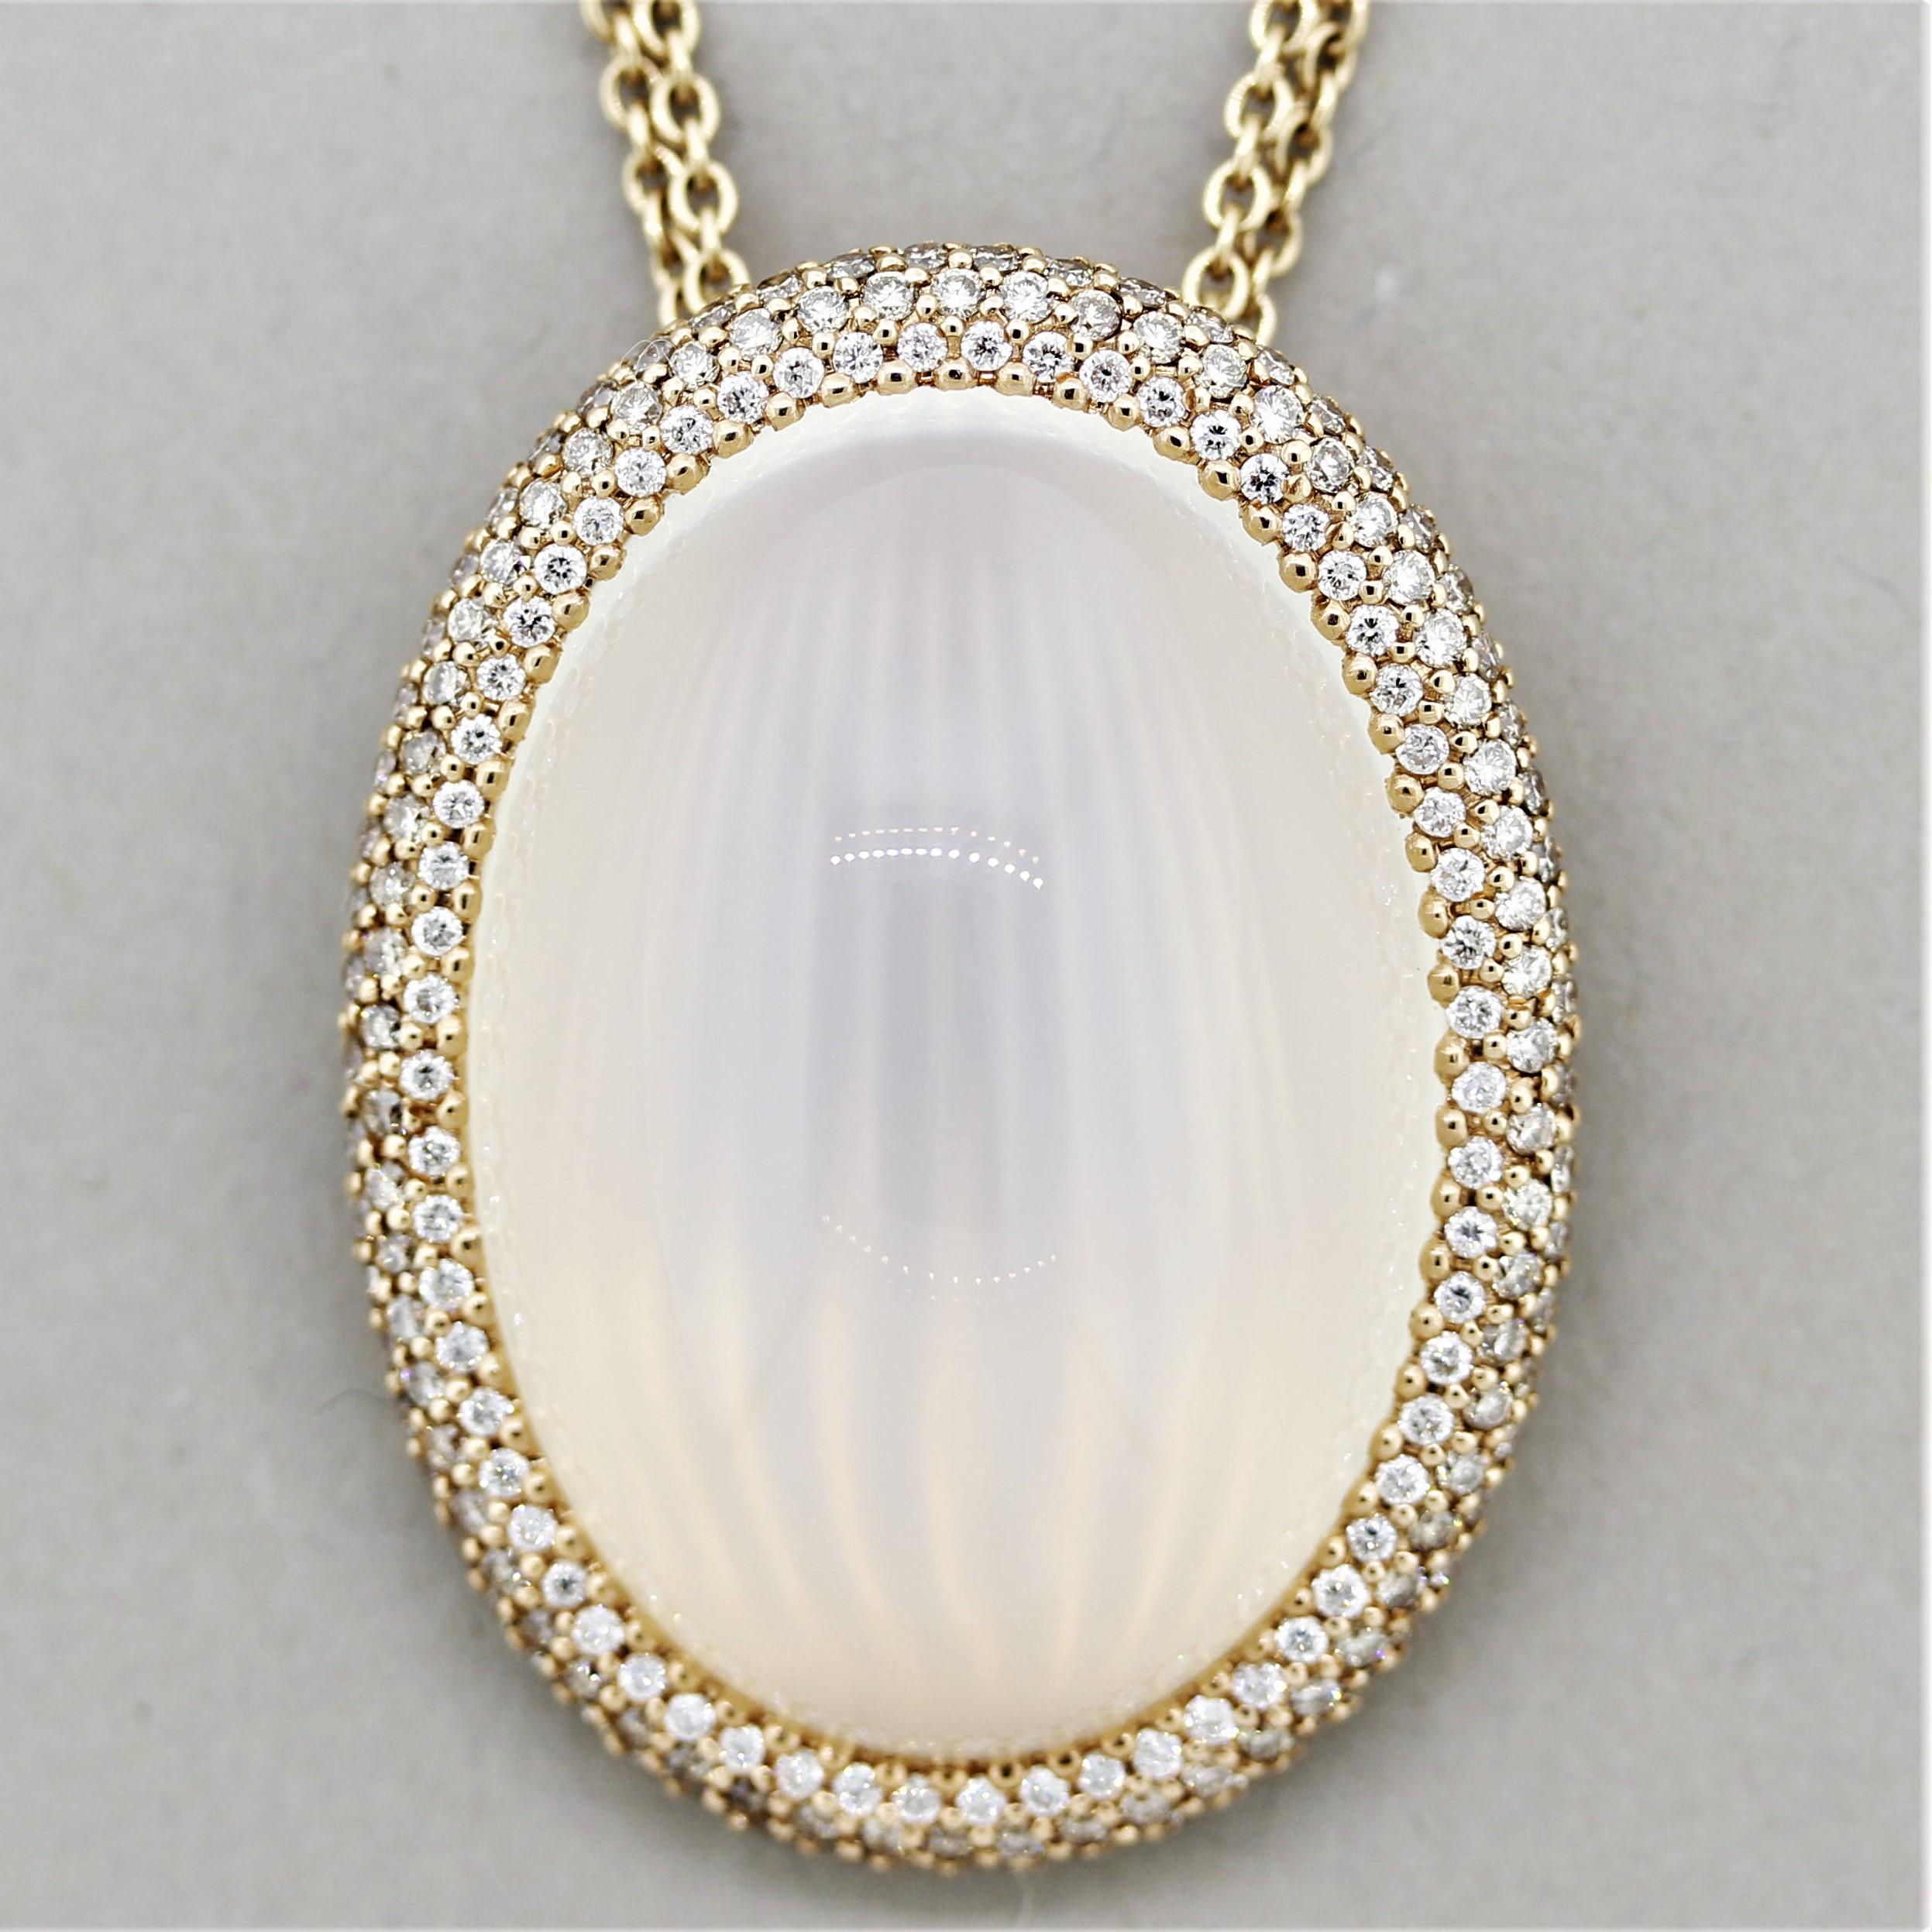 moonstone and diamond necklace